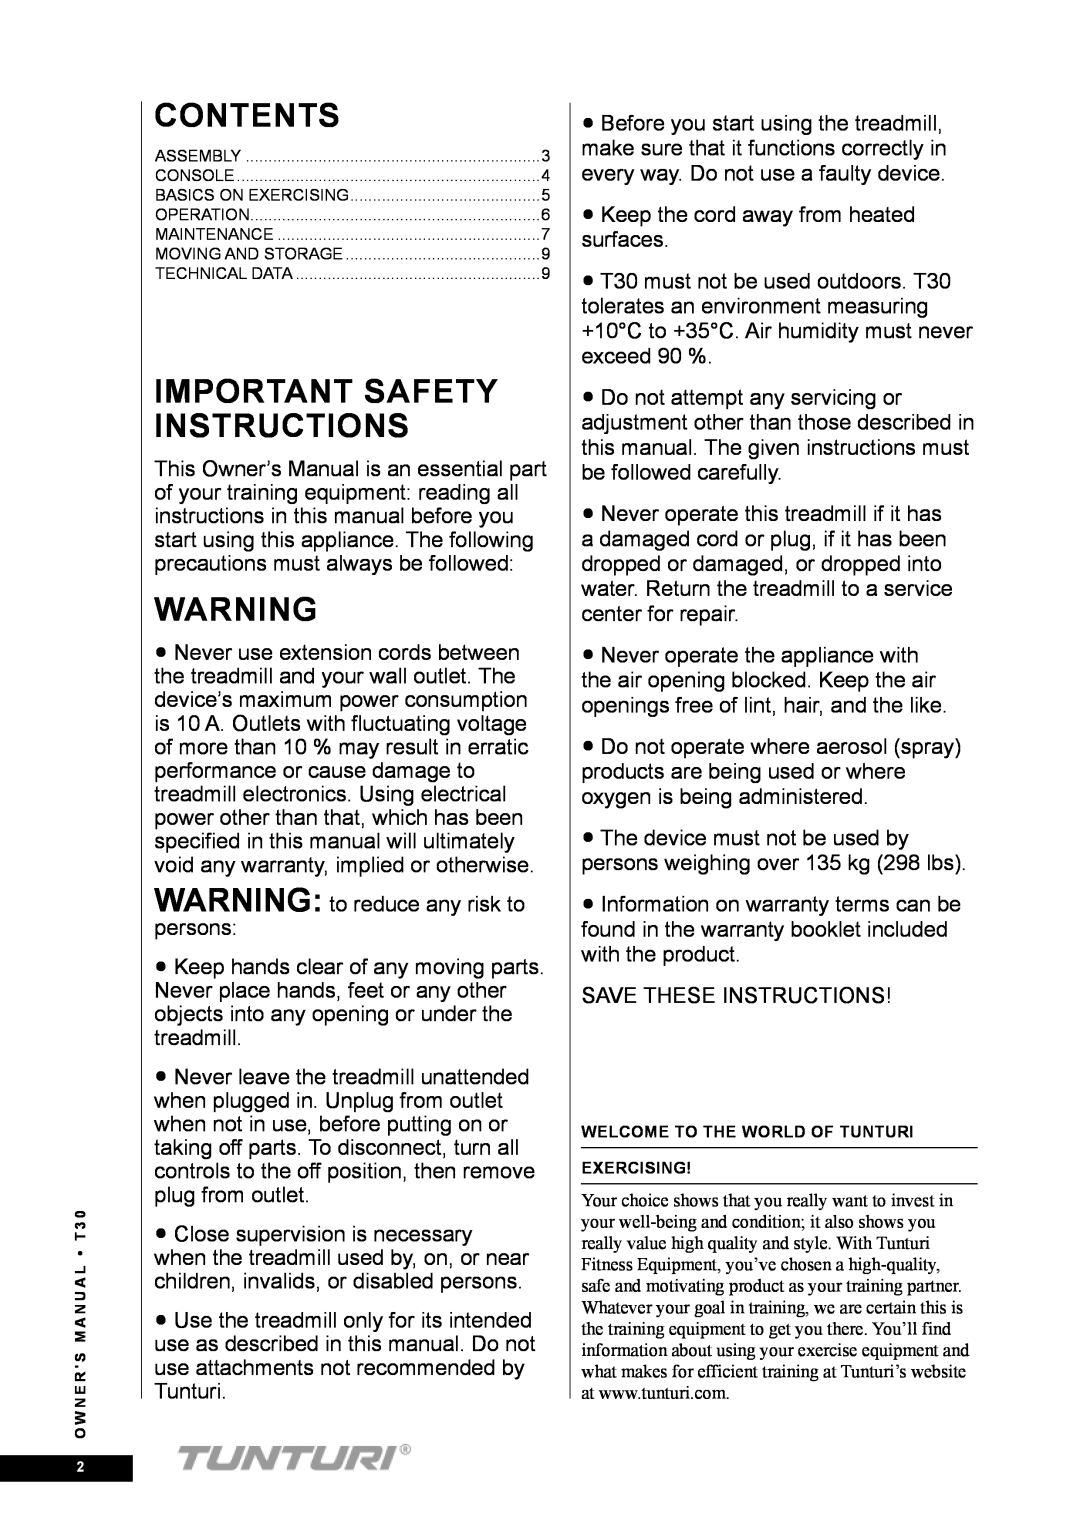 Tunturi T30 owner manual Contents, Important Safety Instructions 